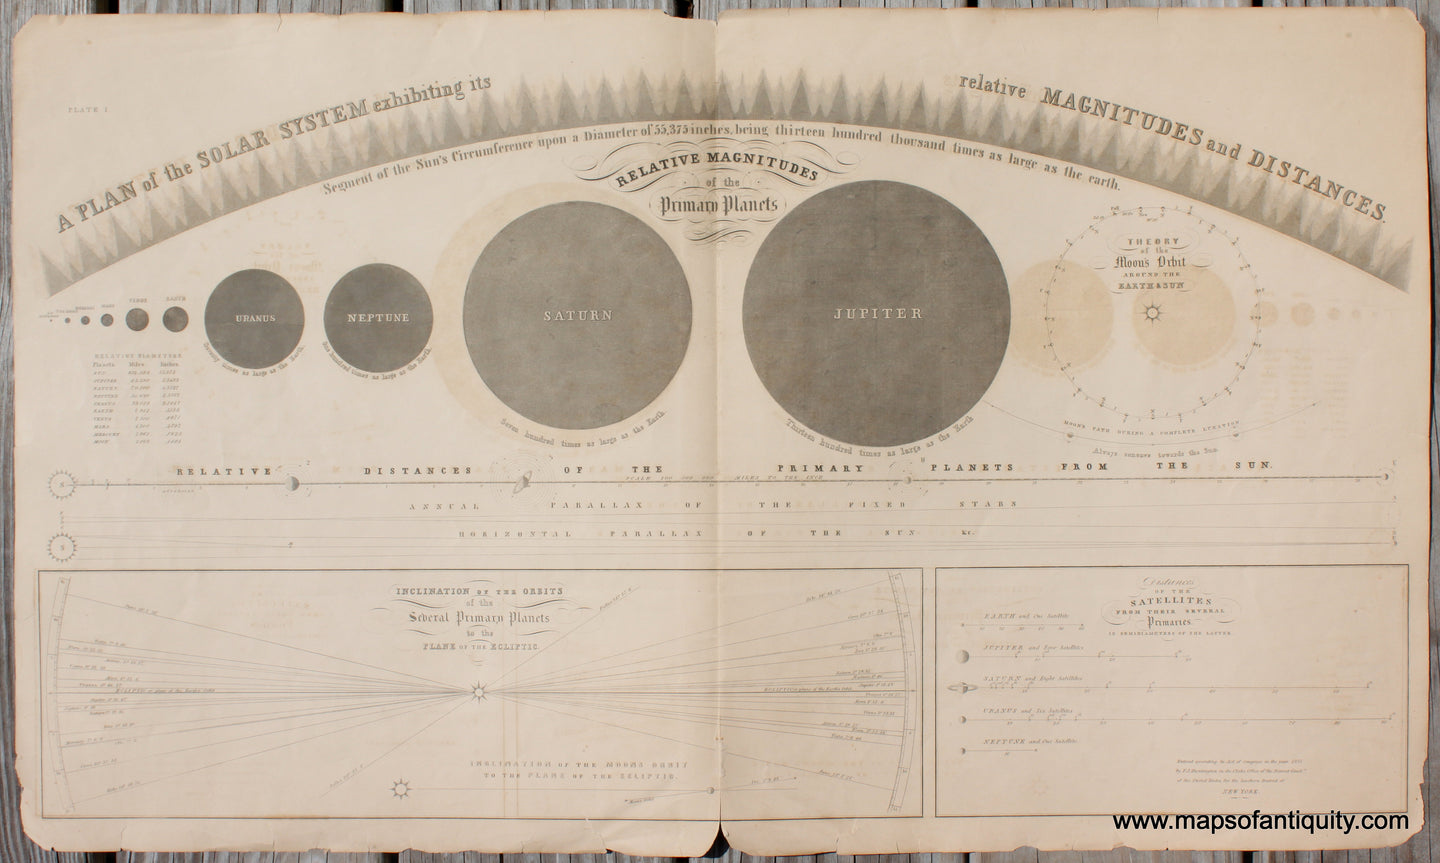 Antique-Map-A-Plan-of-the-Solar-System-Exhibiting-its-Relative-Magnitudes-and-Distances-engraving-print-1856-Burritt-1800s-19th-century-Maps-of-Antiquity